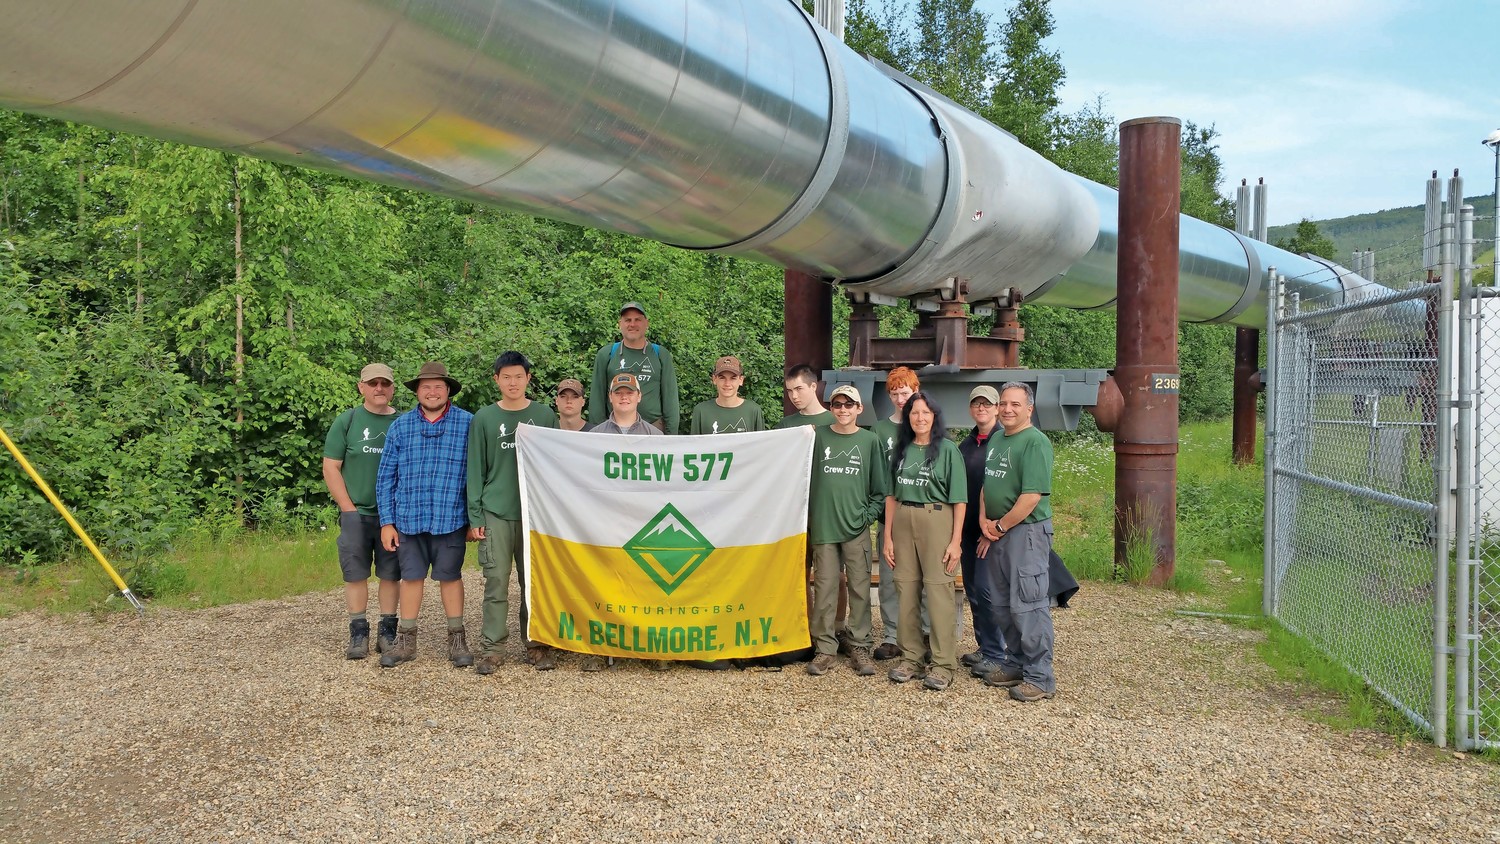 Scouting Crew 577 proudly displayed their crew number near the famous Alaskan pipeline during their trip to Alaska.